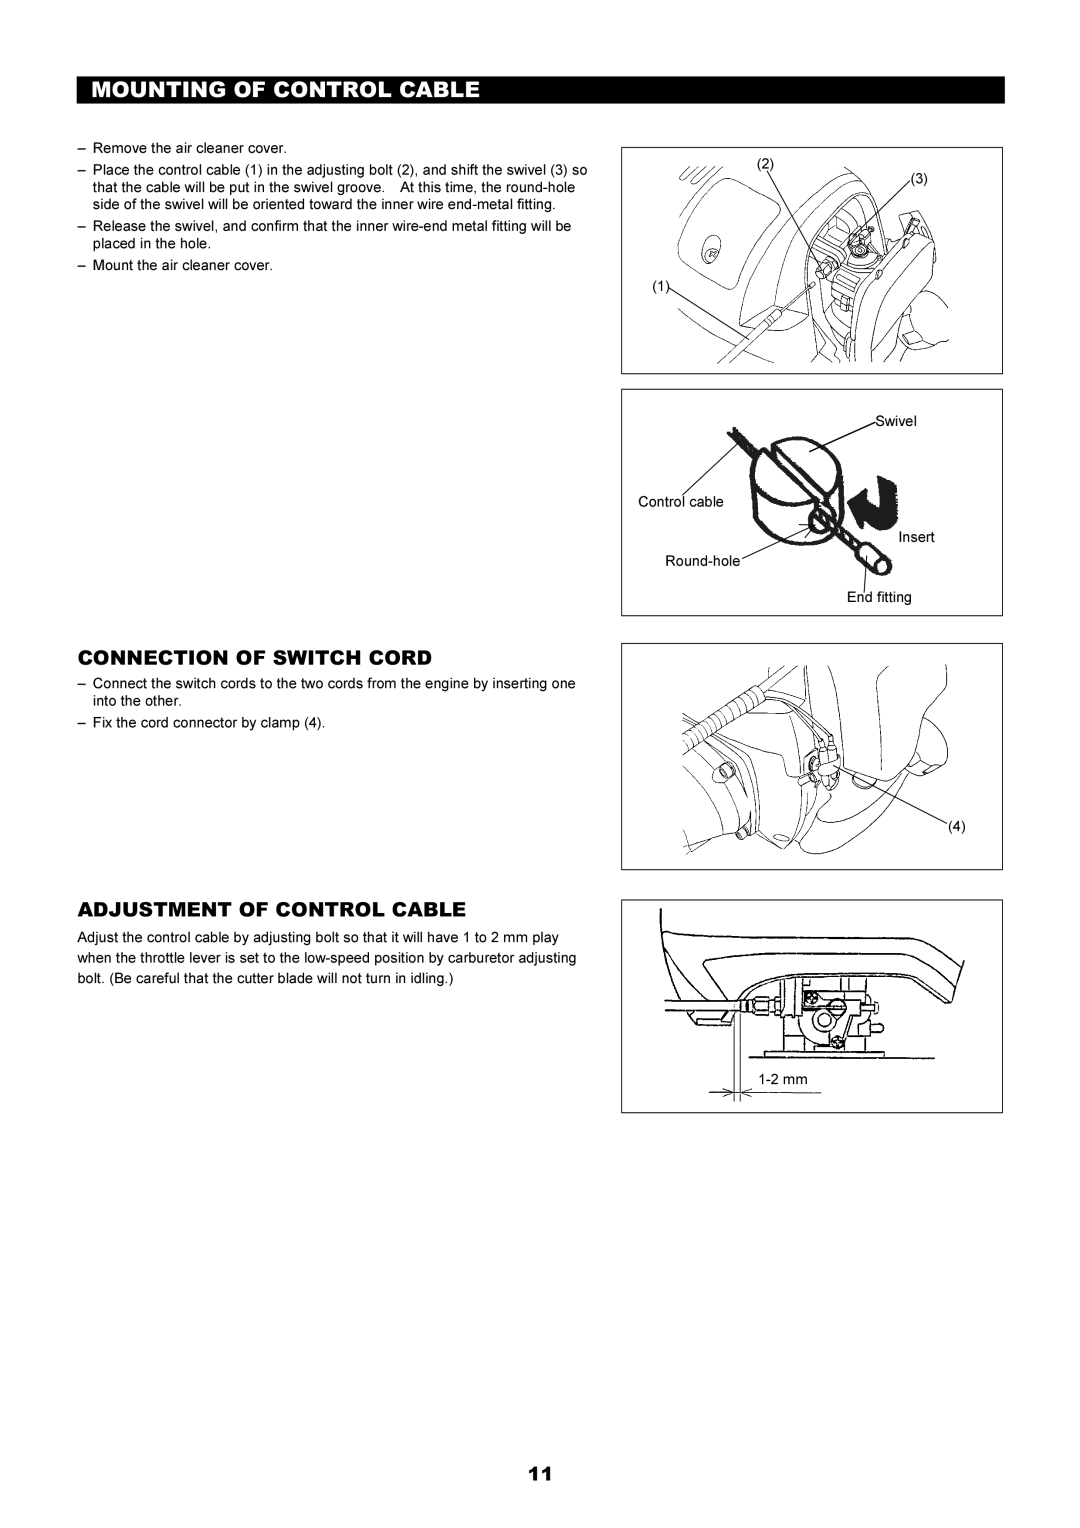 Makita EM4341, EM4340L instruction manual Mounting Of Control Cable, Connection Of Switch Cord, Adjustment Of Control Cable 